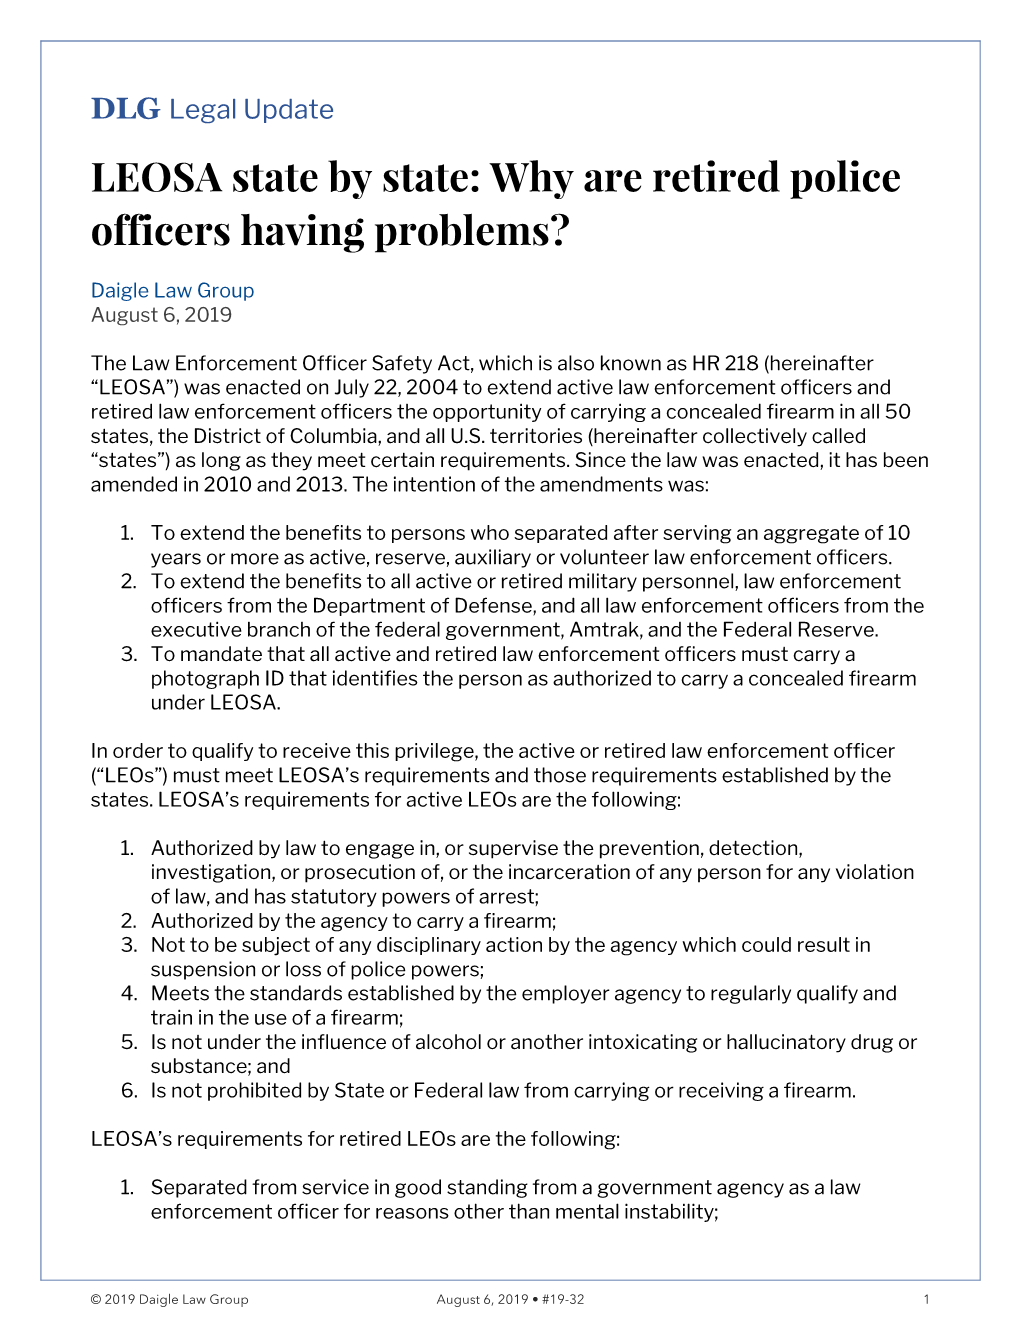 LEOSA State by State: Why Are Retired Police Officers Having Problems?